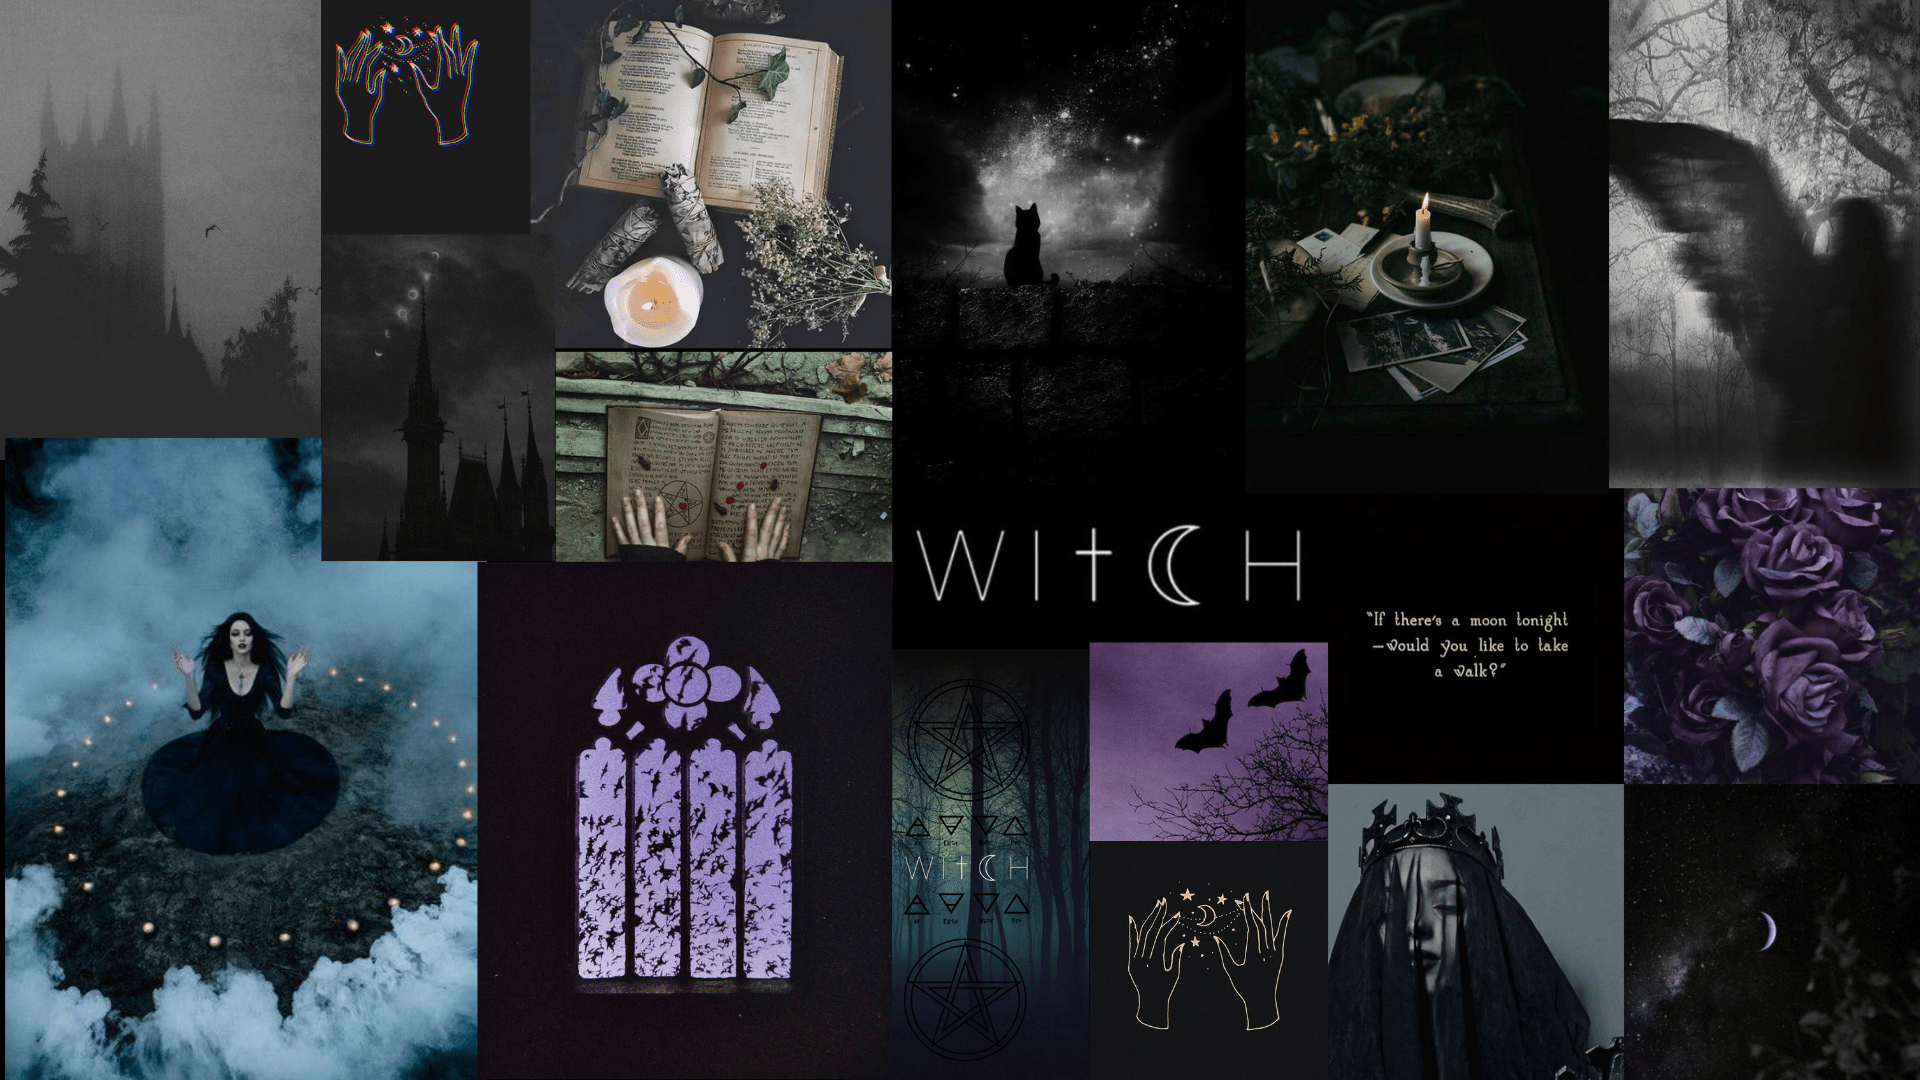 Witchcraft Aesthetic Wallpaper. Computer wallpaper, Aesthetic iphone wallpaper, Aesthetic wallpaper